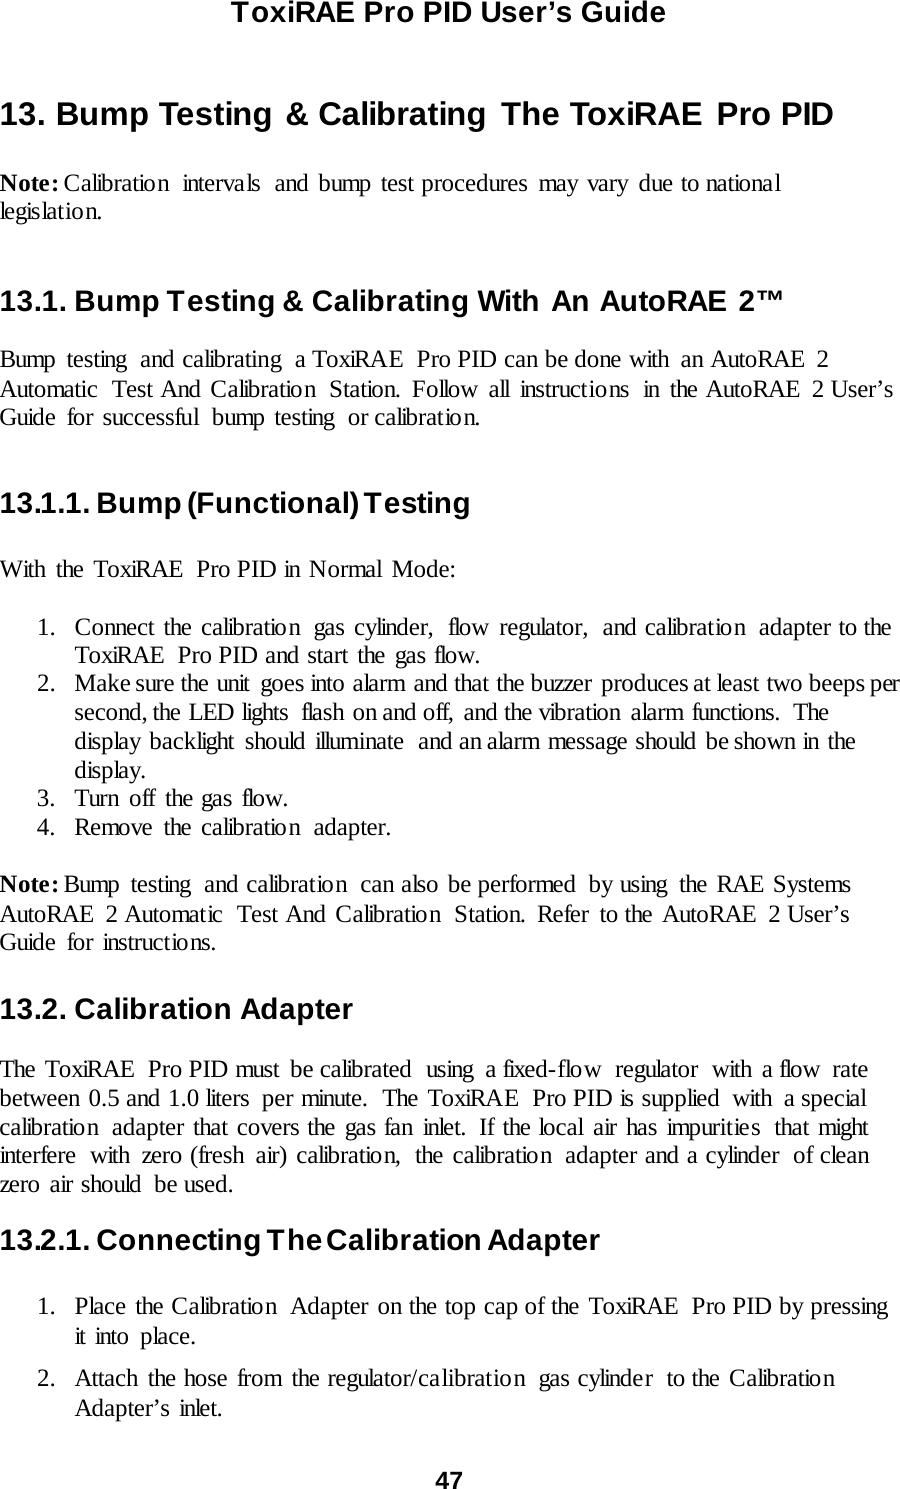 ToxiRAE Pro PID User’s Guide  47   13. Bump Testing &amp; Calibrating The ToxiRAE Pro PID  Note: Calibration  intervals  and bump test procedures may vary due to national legislatio n.     13.1. Bump Testing &amp; Calibrating With An AutoRAE 2™  Bump testing and calibrating a ToxiRAE  Pro PID can be done with  an AutoRAE  2 Automatic Test And Calibration Station. Follow all instructio ns in the AutoRAE 2 User’s Guide for successful  bump testing  or calibrat io n.  13.1.1. Bump (Functional) Testing  With the ToxiRAE  Pro PID in Normal Mode:  1. Connect the calibration gas cylinder, flow regulator, and calibration adapter to the ToxiRAE  Pro PID and start the gas flow. 2. Make sure the unit  goes into alarm and that the buzzer produces at least two beeps per second, the LED lights  flash on and off, and the vibration  alarm functions.  The display backlight should illuminate  and an alarm message should be shown in the display. 3. Turn off the gas flow. 4. Remove the calibration  adapter.  Note: Bump testing and calibration  can also be performed by using the RAE Systems AutoRAE 2 Automatic Test And Calibration Station. Refer  to the AutoRAE 2 User’s Guide for instructions.   13.2. Calibration Adapter  The ToxiRAE  Pro PID must  be calibrated  using  a fixed-flow regulator  with  a flow  rate between 0.5 and 1.0 liters  per minute.  The ToxiRAE  Pro PID is supplied with a special calibration  adapter that covers the gas fan inlet. If the local air has impuritie s  that might interfere  with zero (fresh air) calibration,  the calibration  adapter and a cylinder  of clean zero air should  be used. 13.2.1. Connecting The Calibration Adapter  1. Place the Calibration  Adapter on the top cap of the ToxiRAE  Pro PID by pressing it into place.   2. Attach the hose from the regulator/calibration  gas cylinde r  to the Calibratio n Adapter’s inlet.   